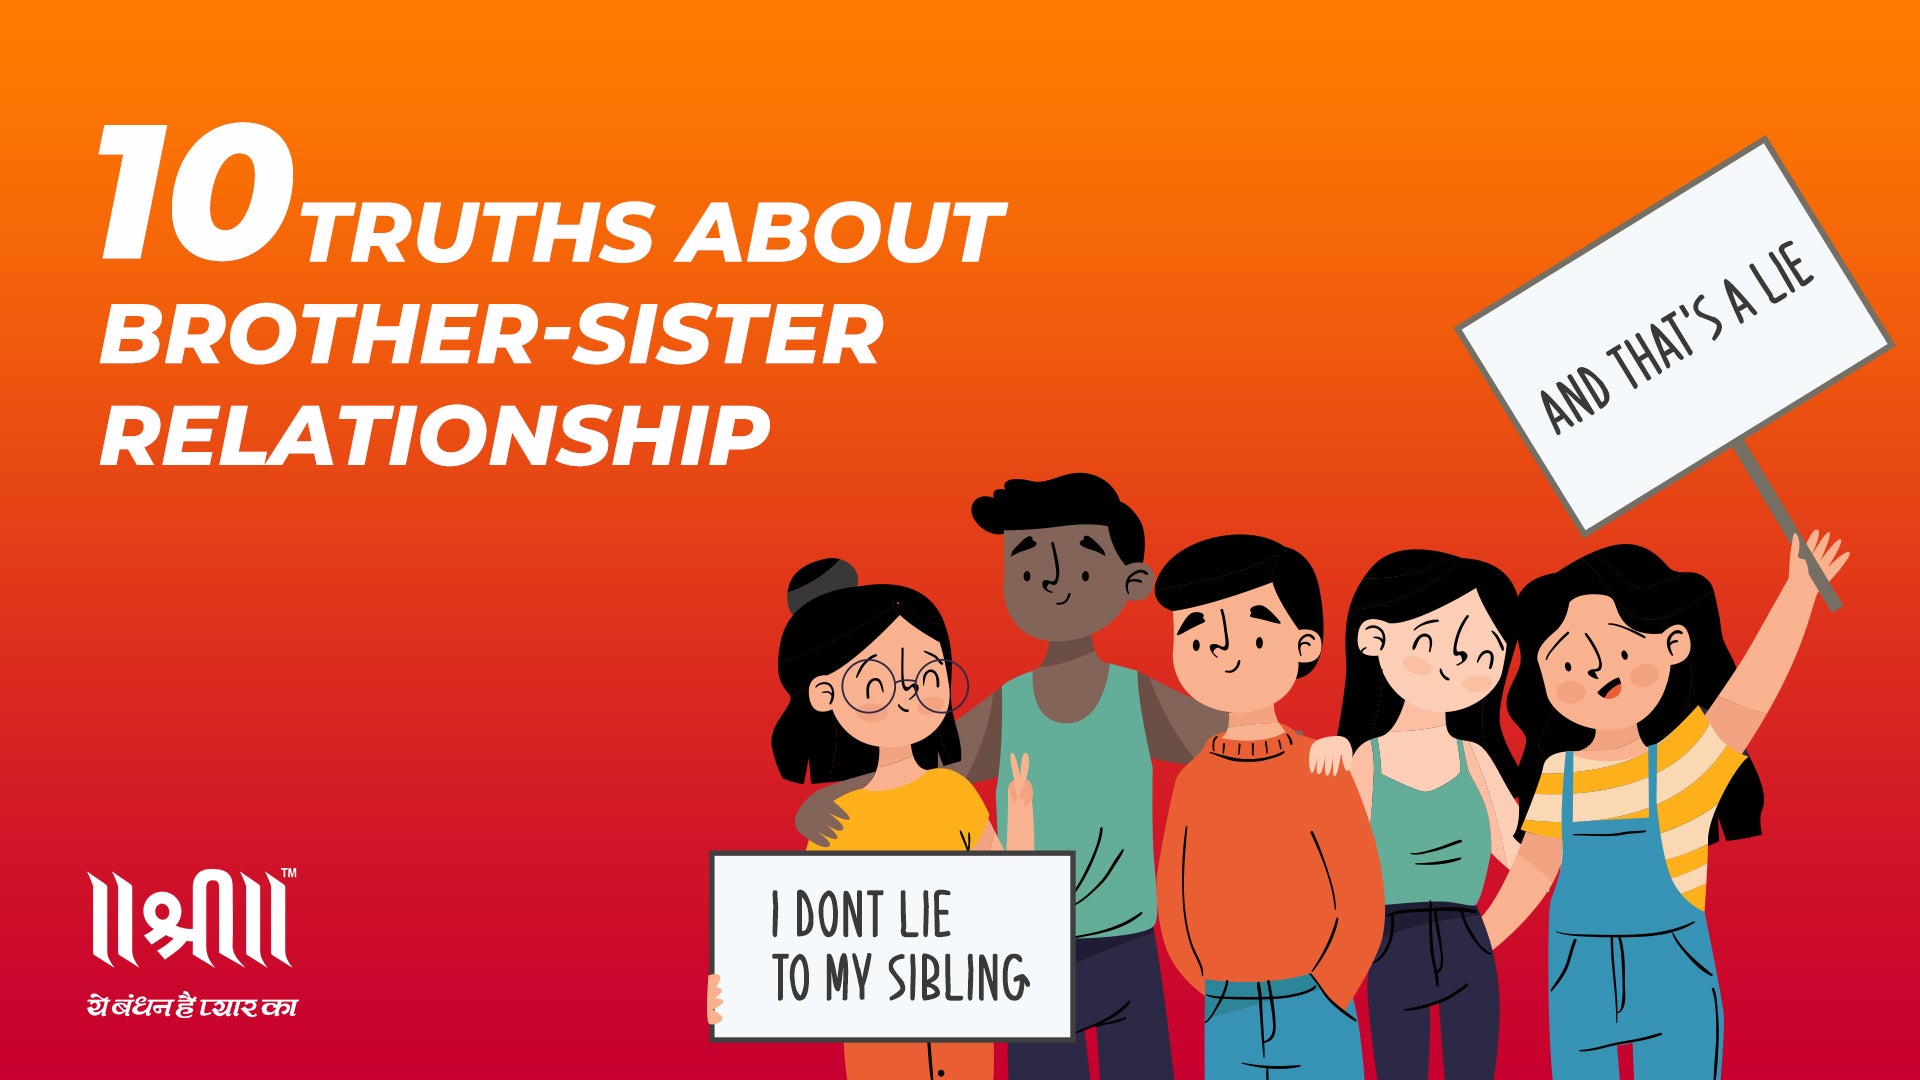 10 Truth About Brother Sister Relationship!